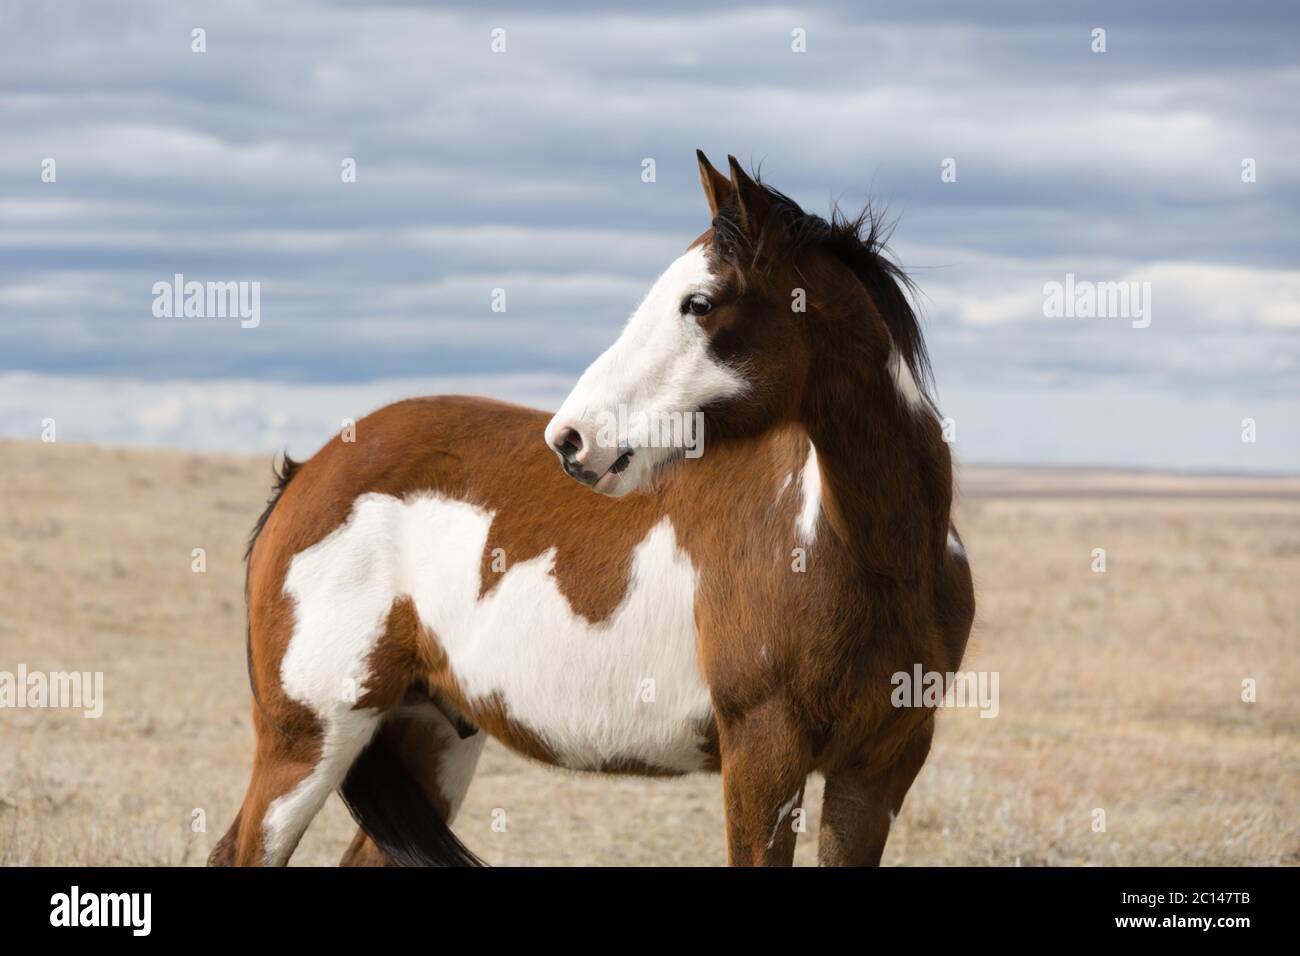 Pinto horse in a field with cloudy sky background Stock Photo